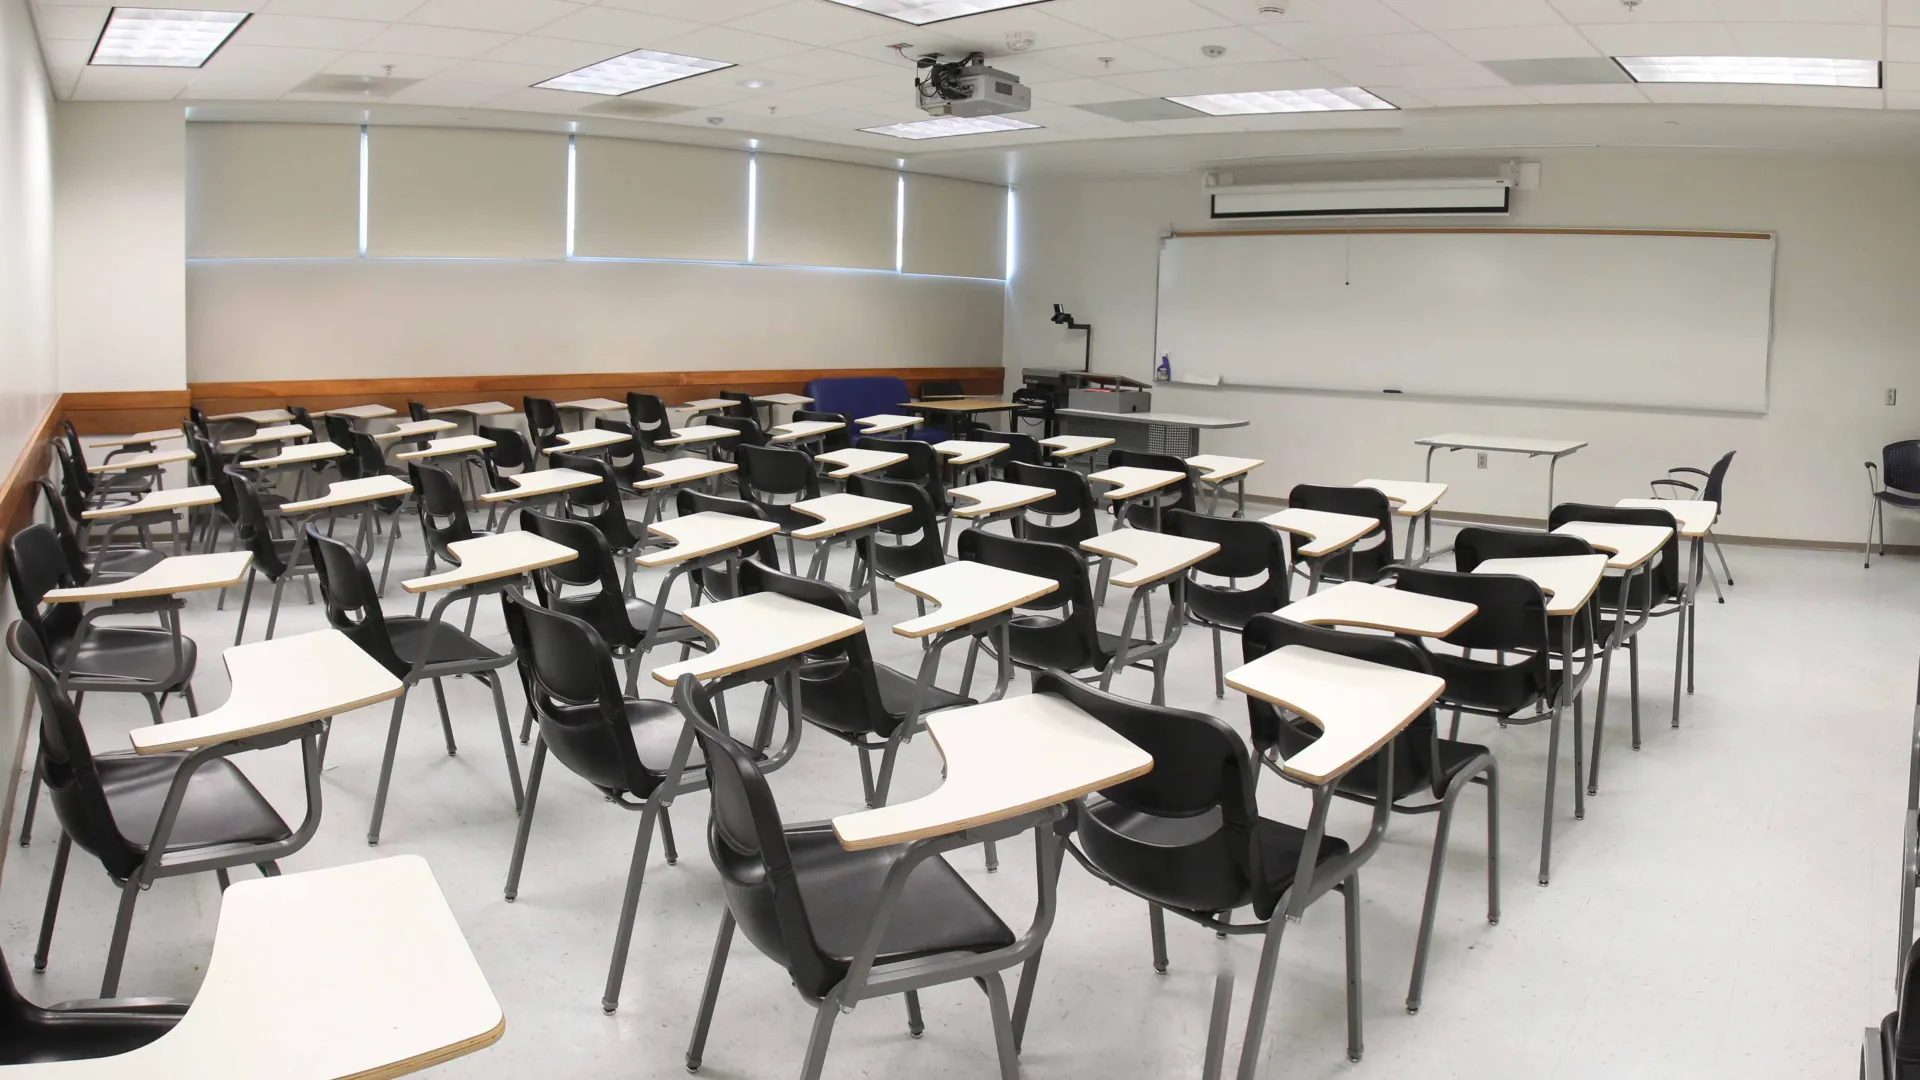 Empty classrooms, an important consideration when working with formerly incarcerated students.